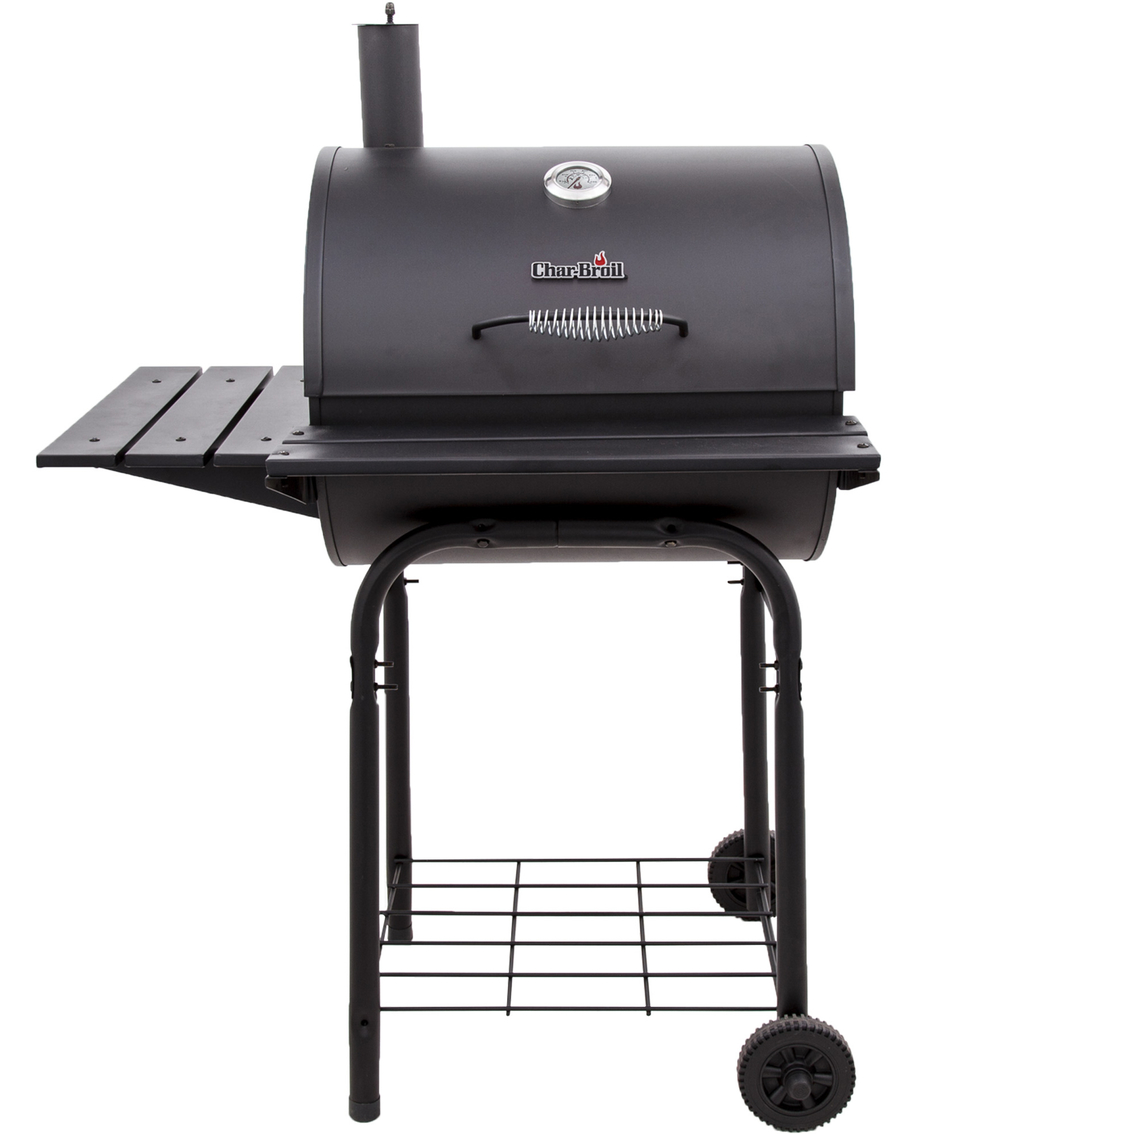 Char-Broil 625 Charcoal Grill - Image 2 of 5